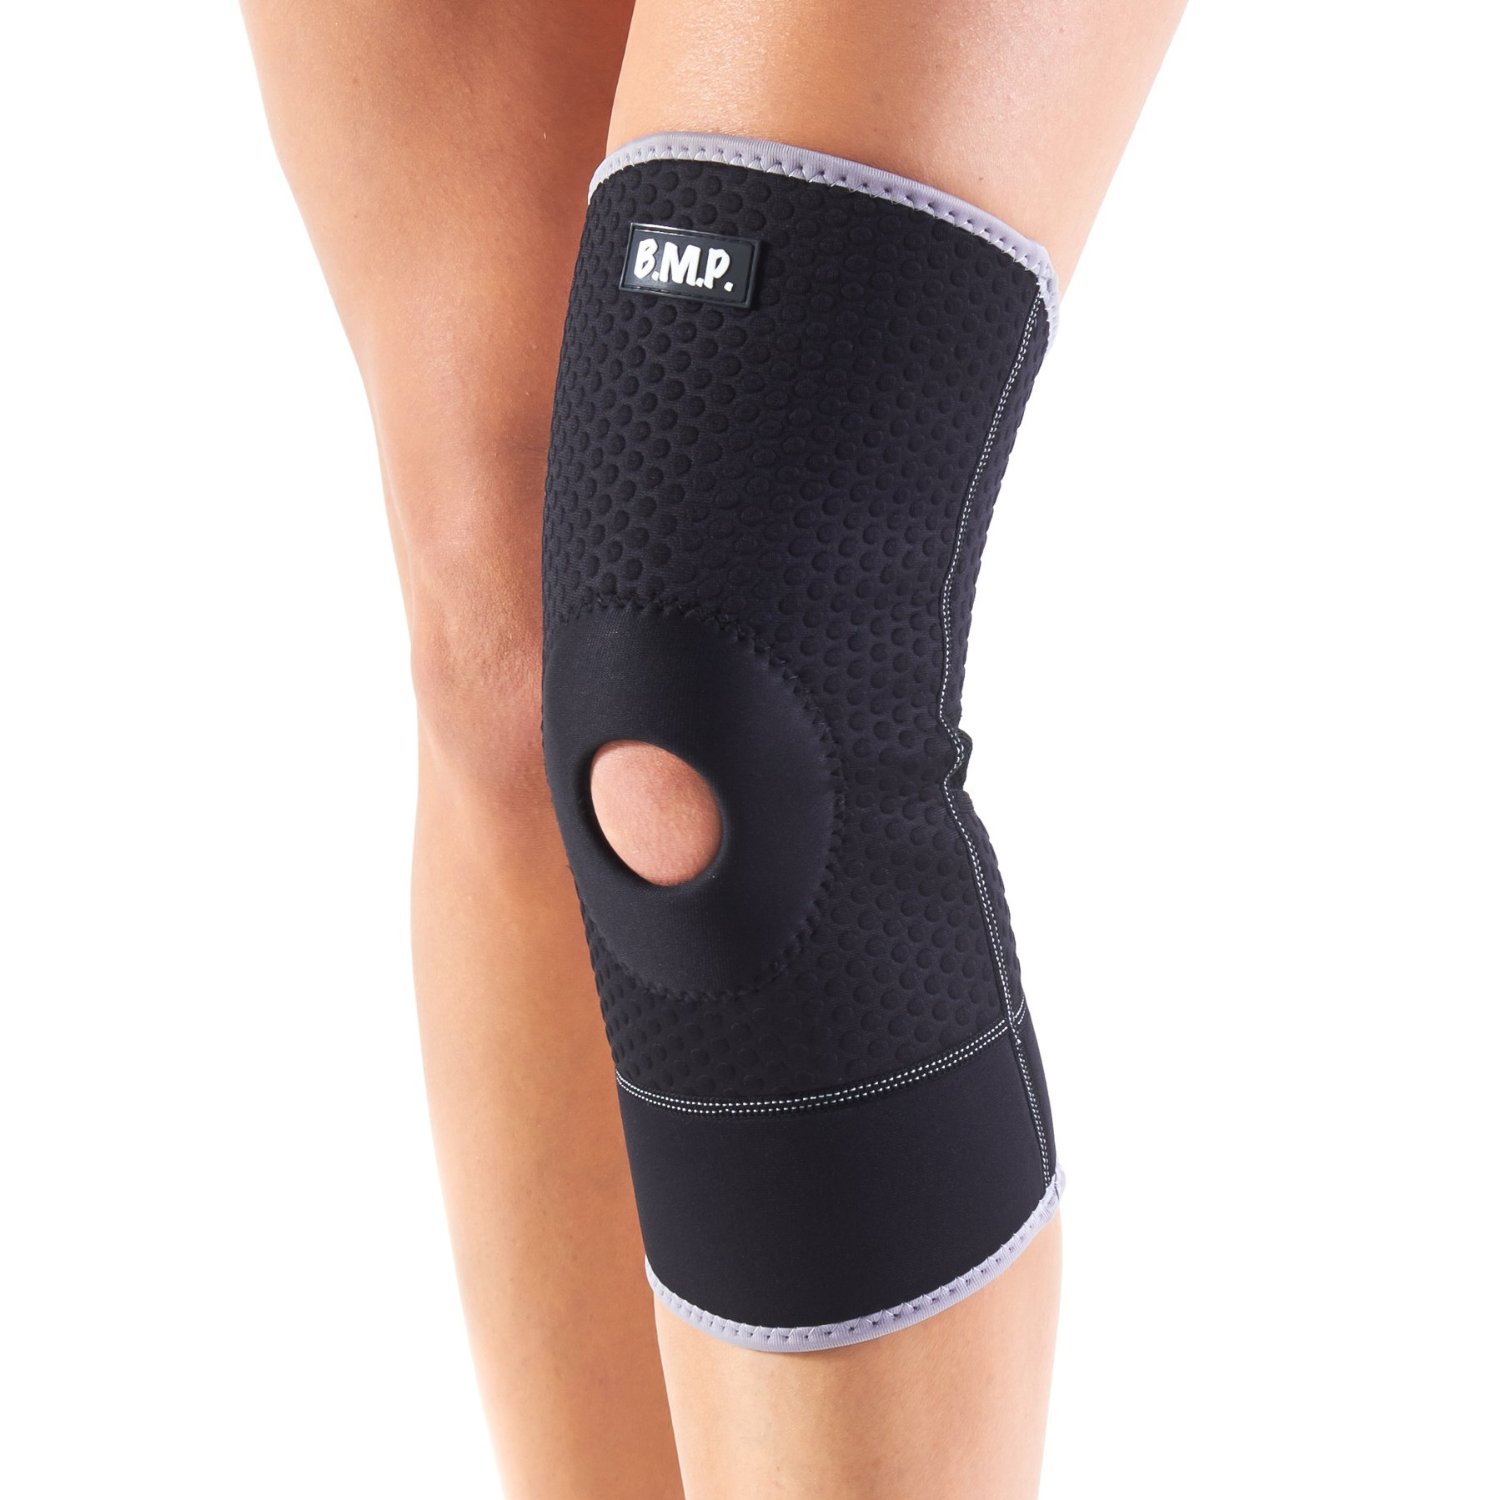 How Long Can You Wear A Knee Compression Sleeve?